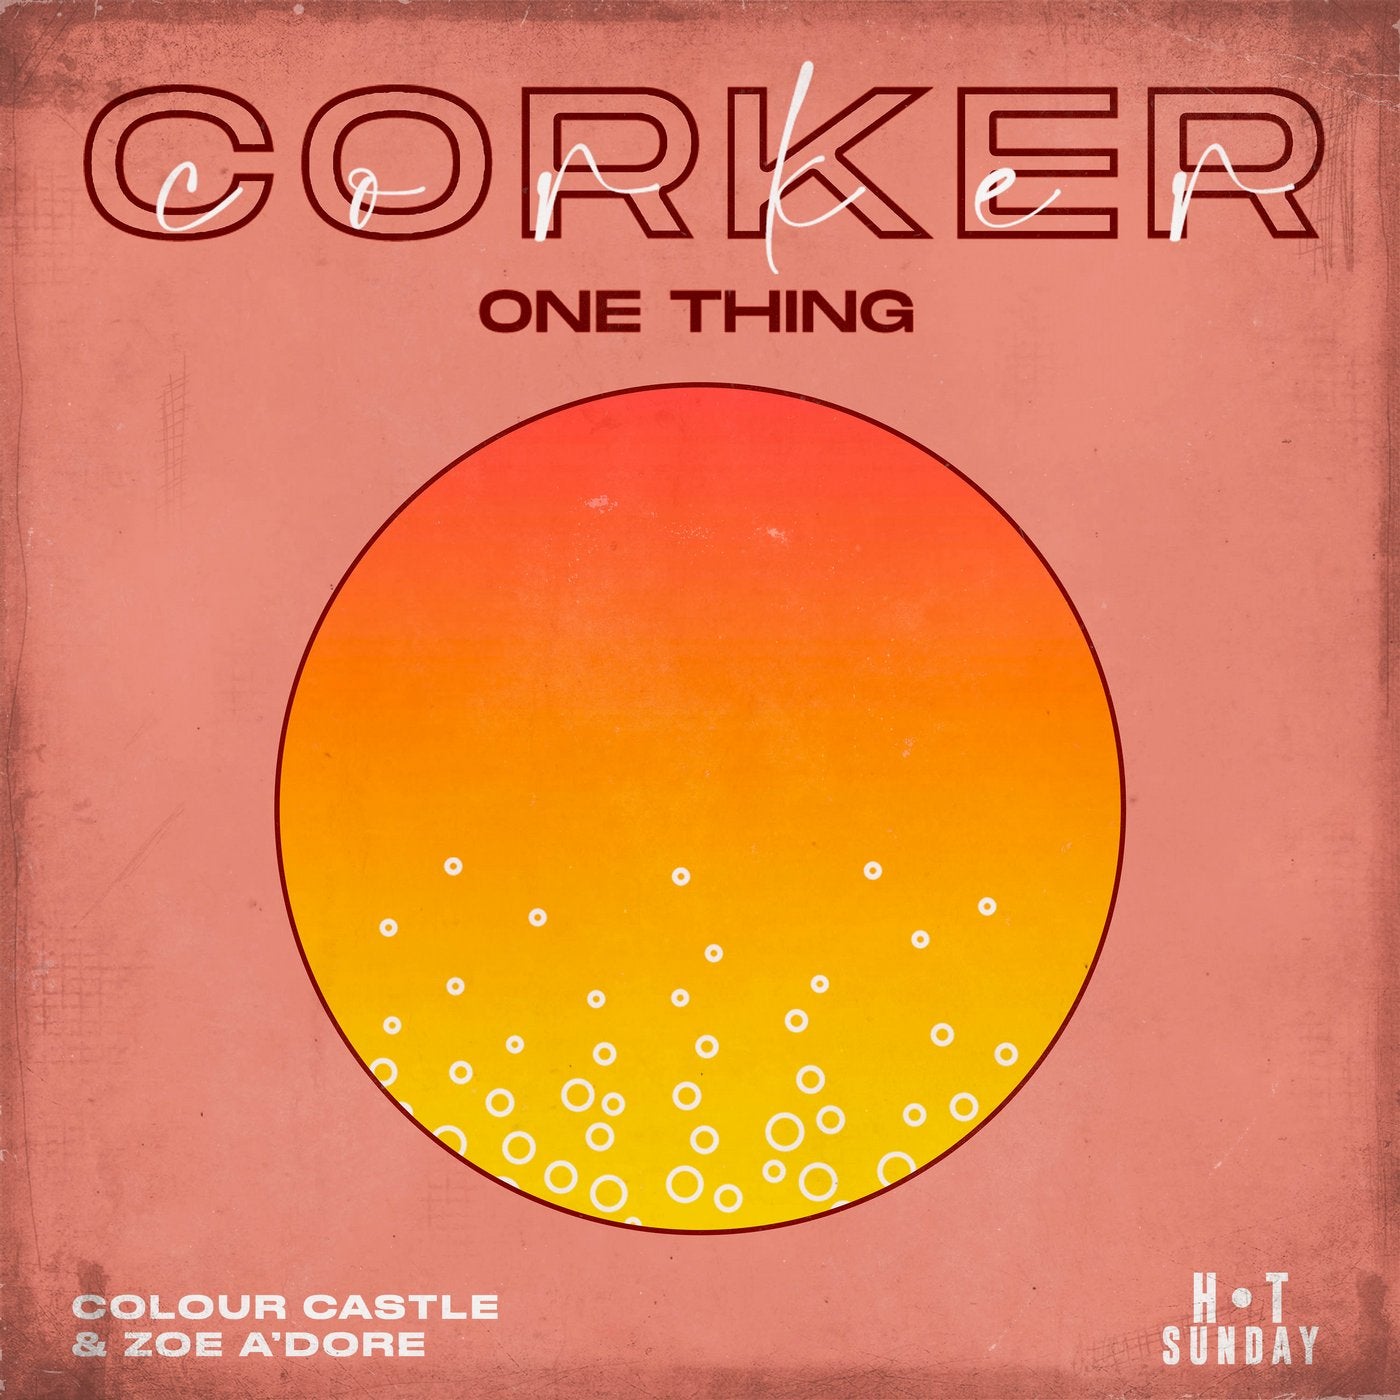 Corker (One Thing)